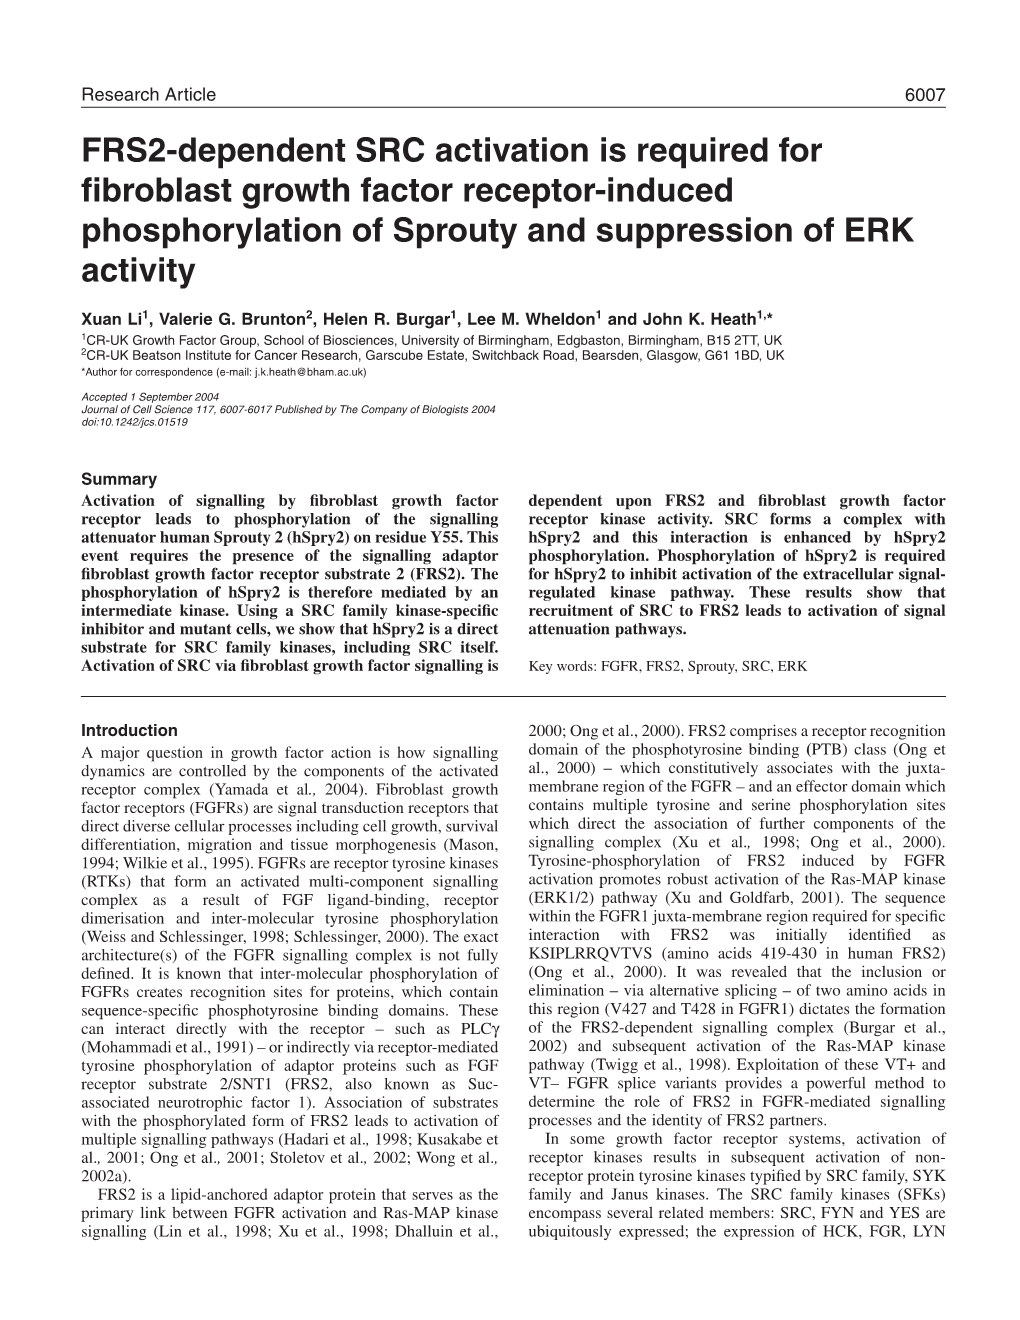 FRS2-Dependent SRC Activation Is Required for Fibroblast Growth Factor